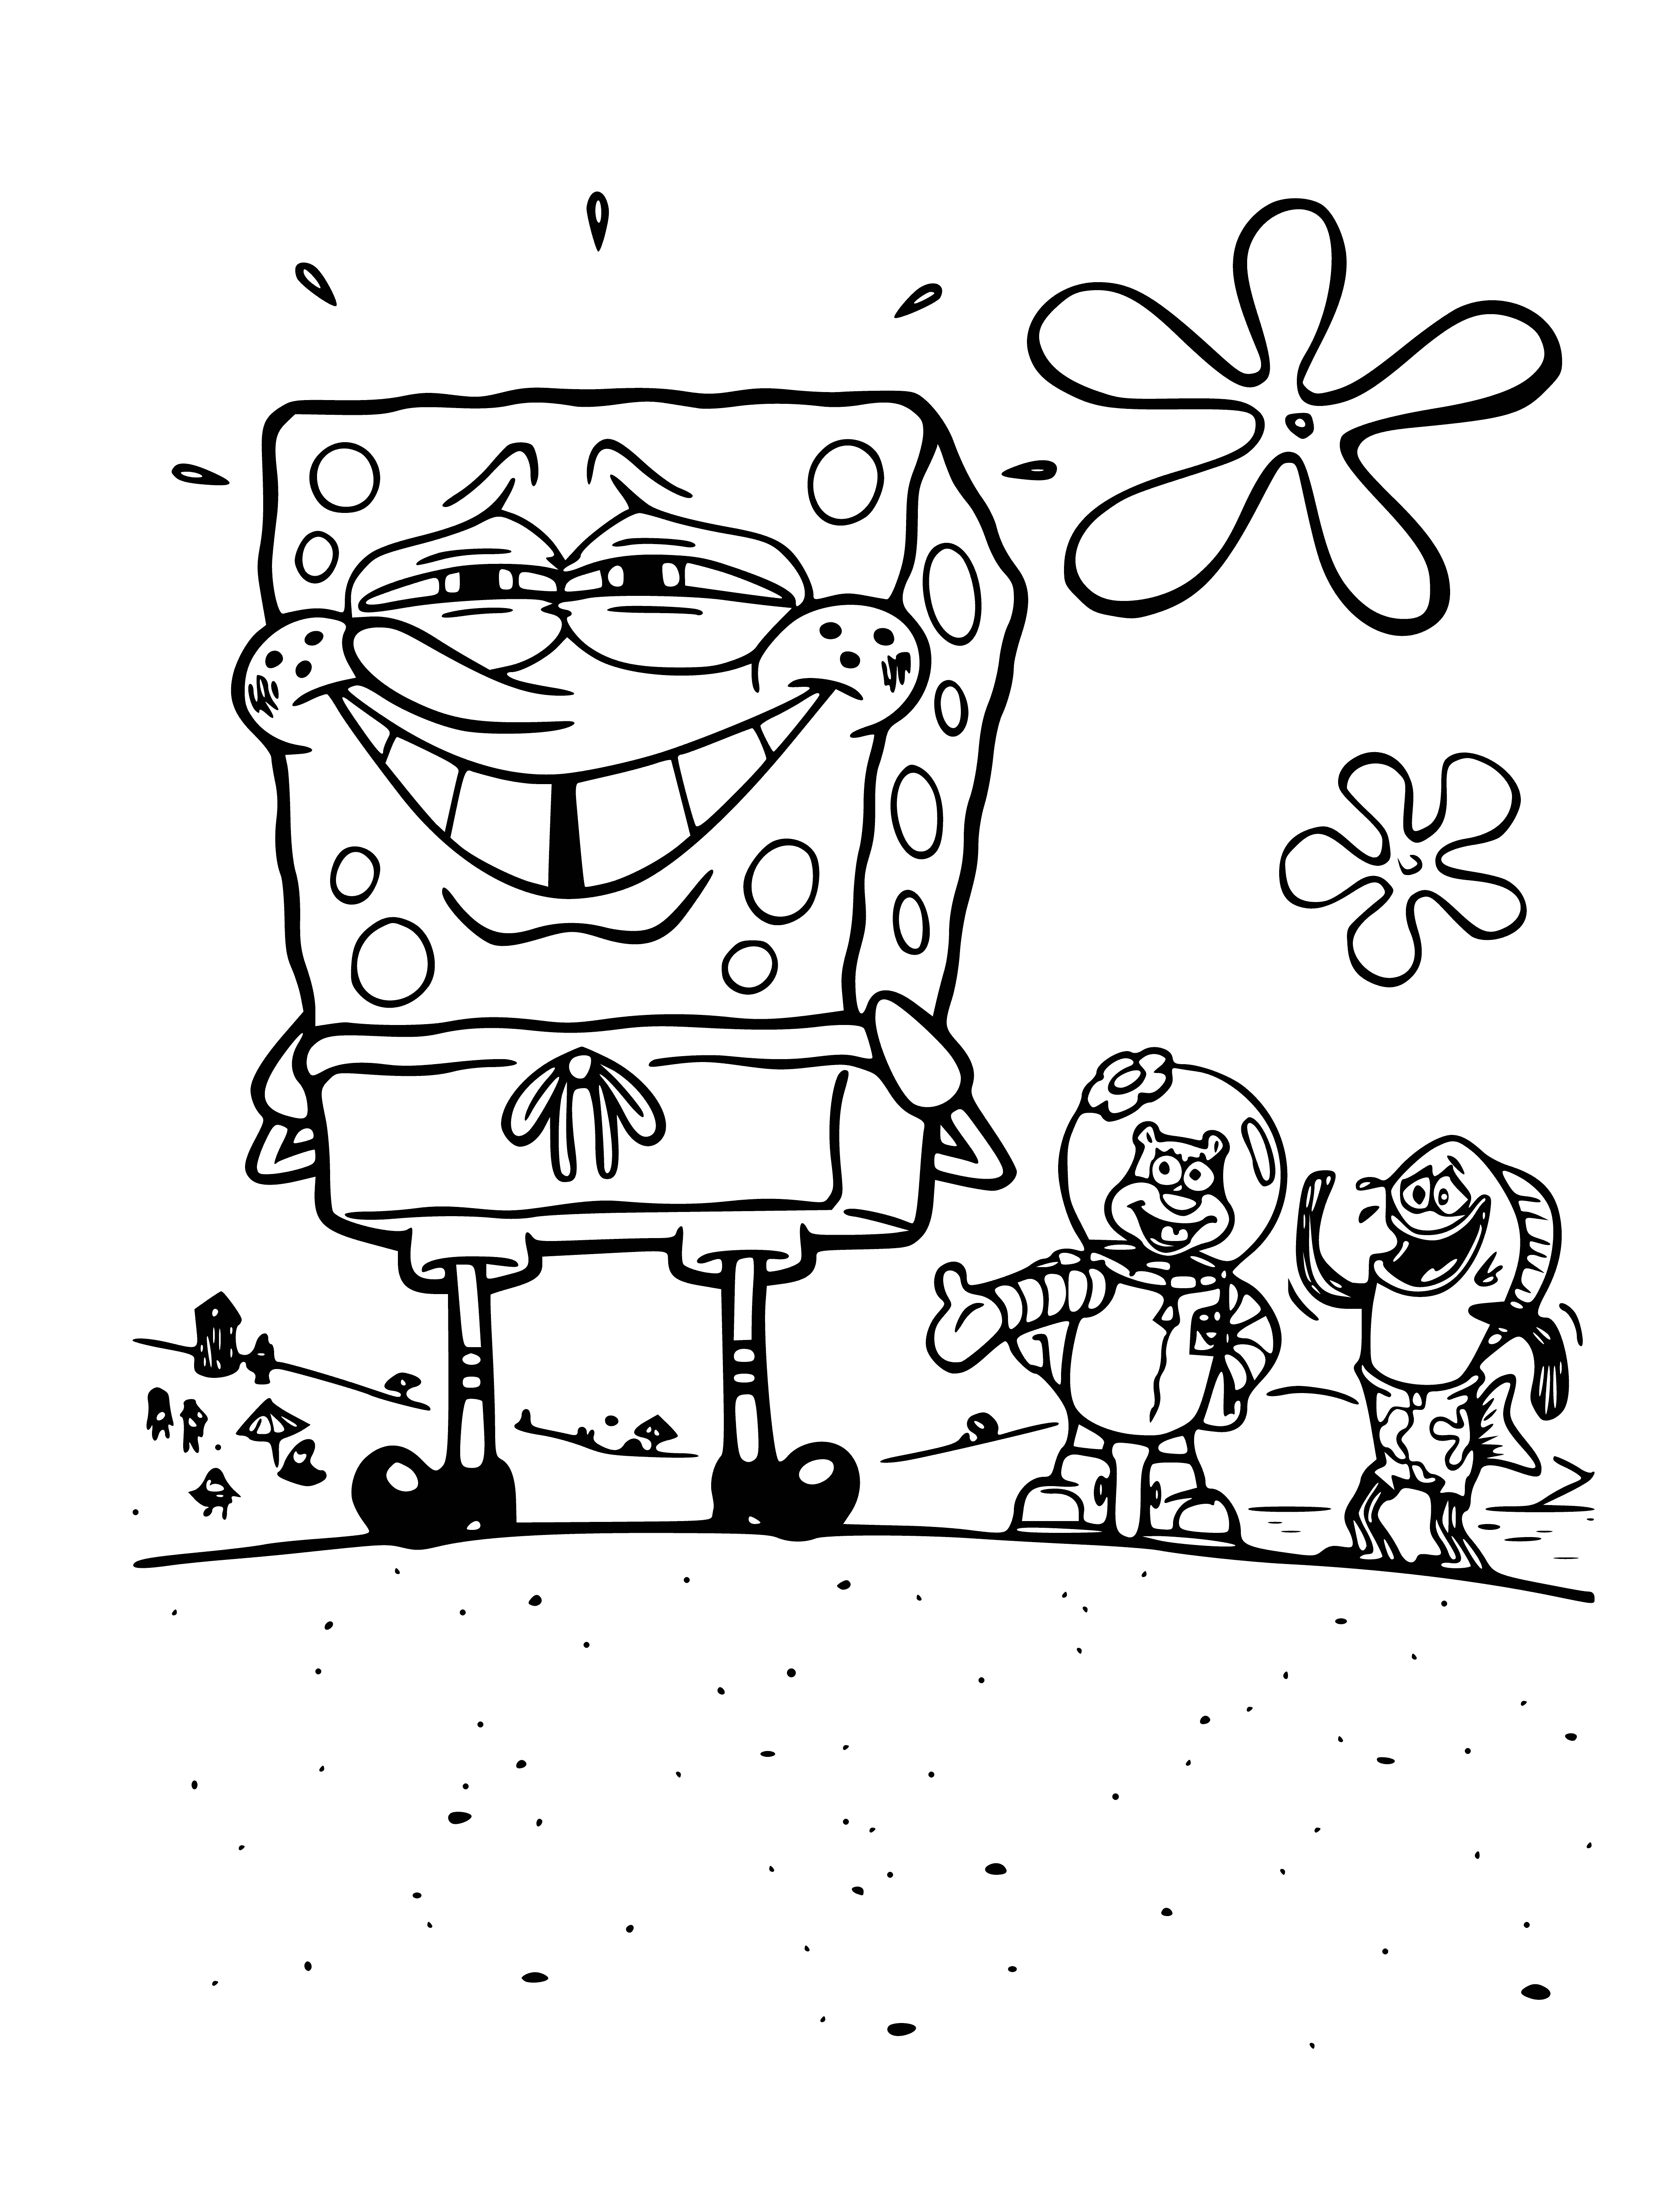 coloring page: A yellow sponge with big blue eyes, red polka-dot shorts, thin arms/legs, & large hands/feet is in this coloring page.